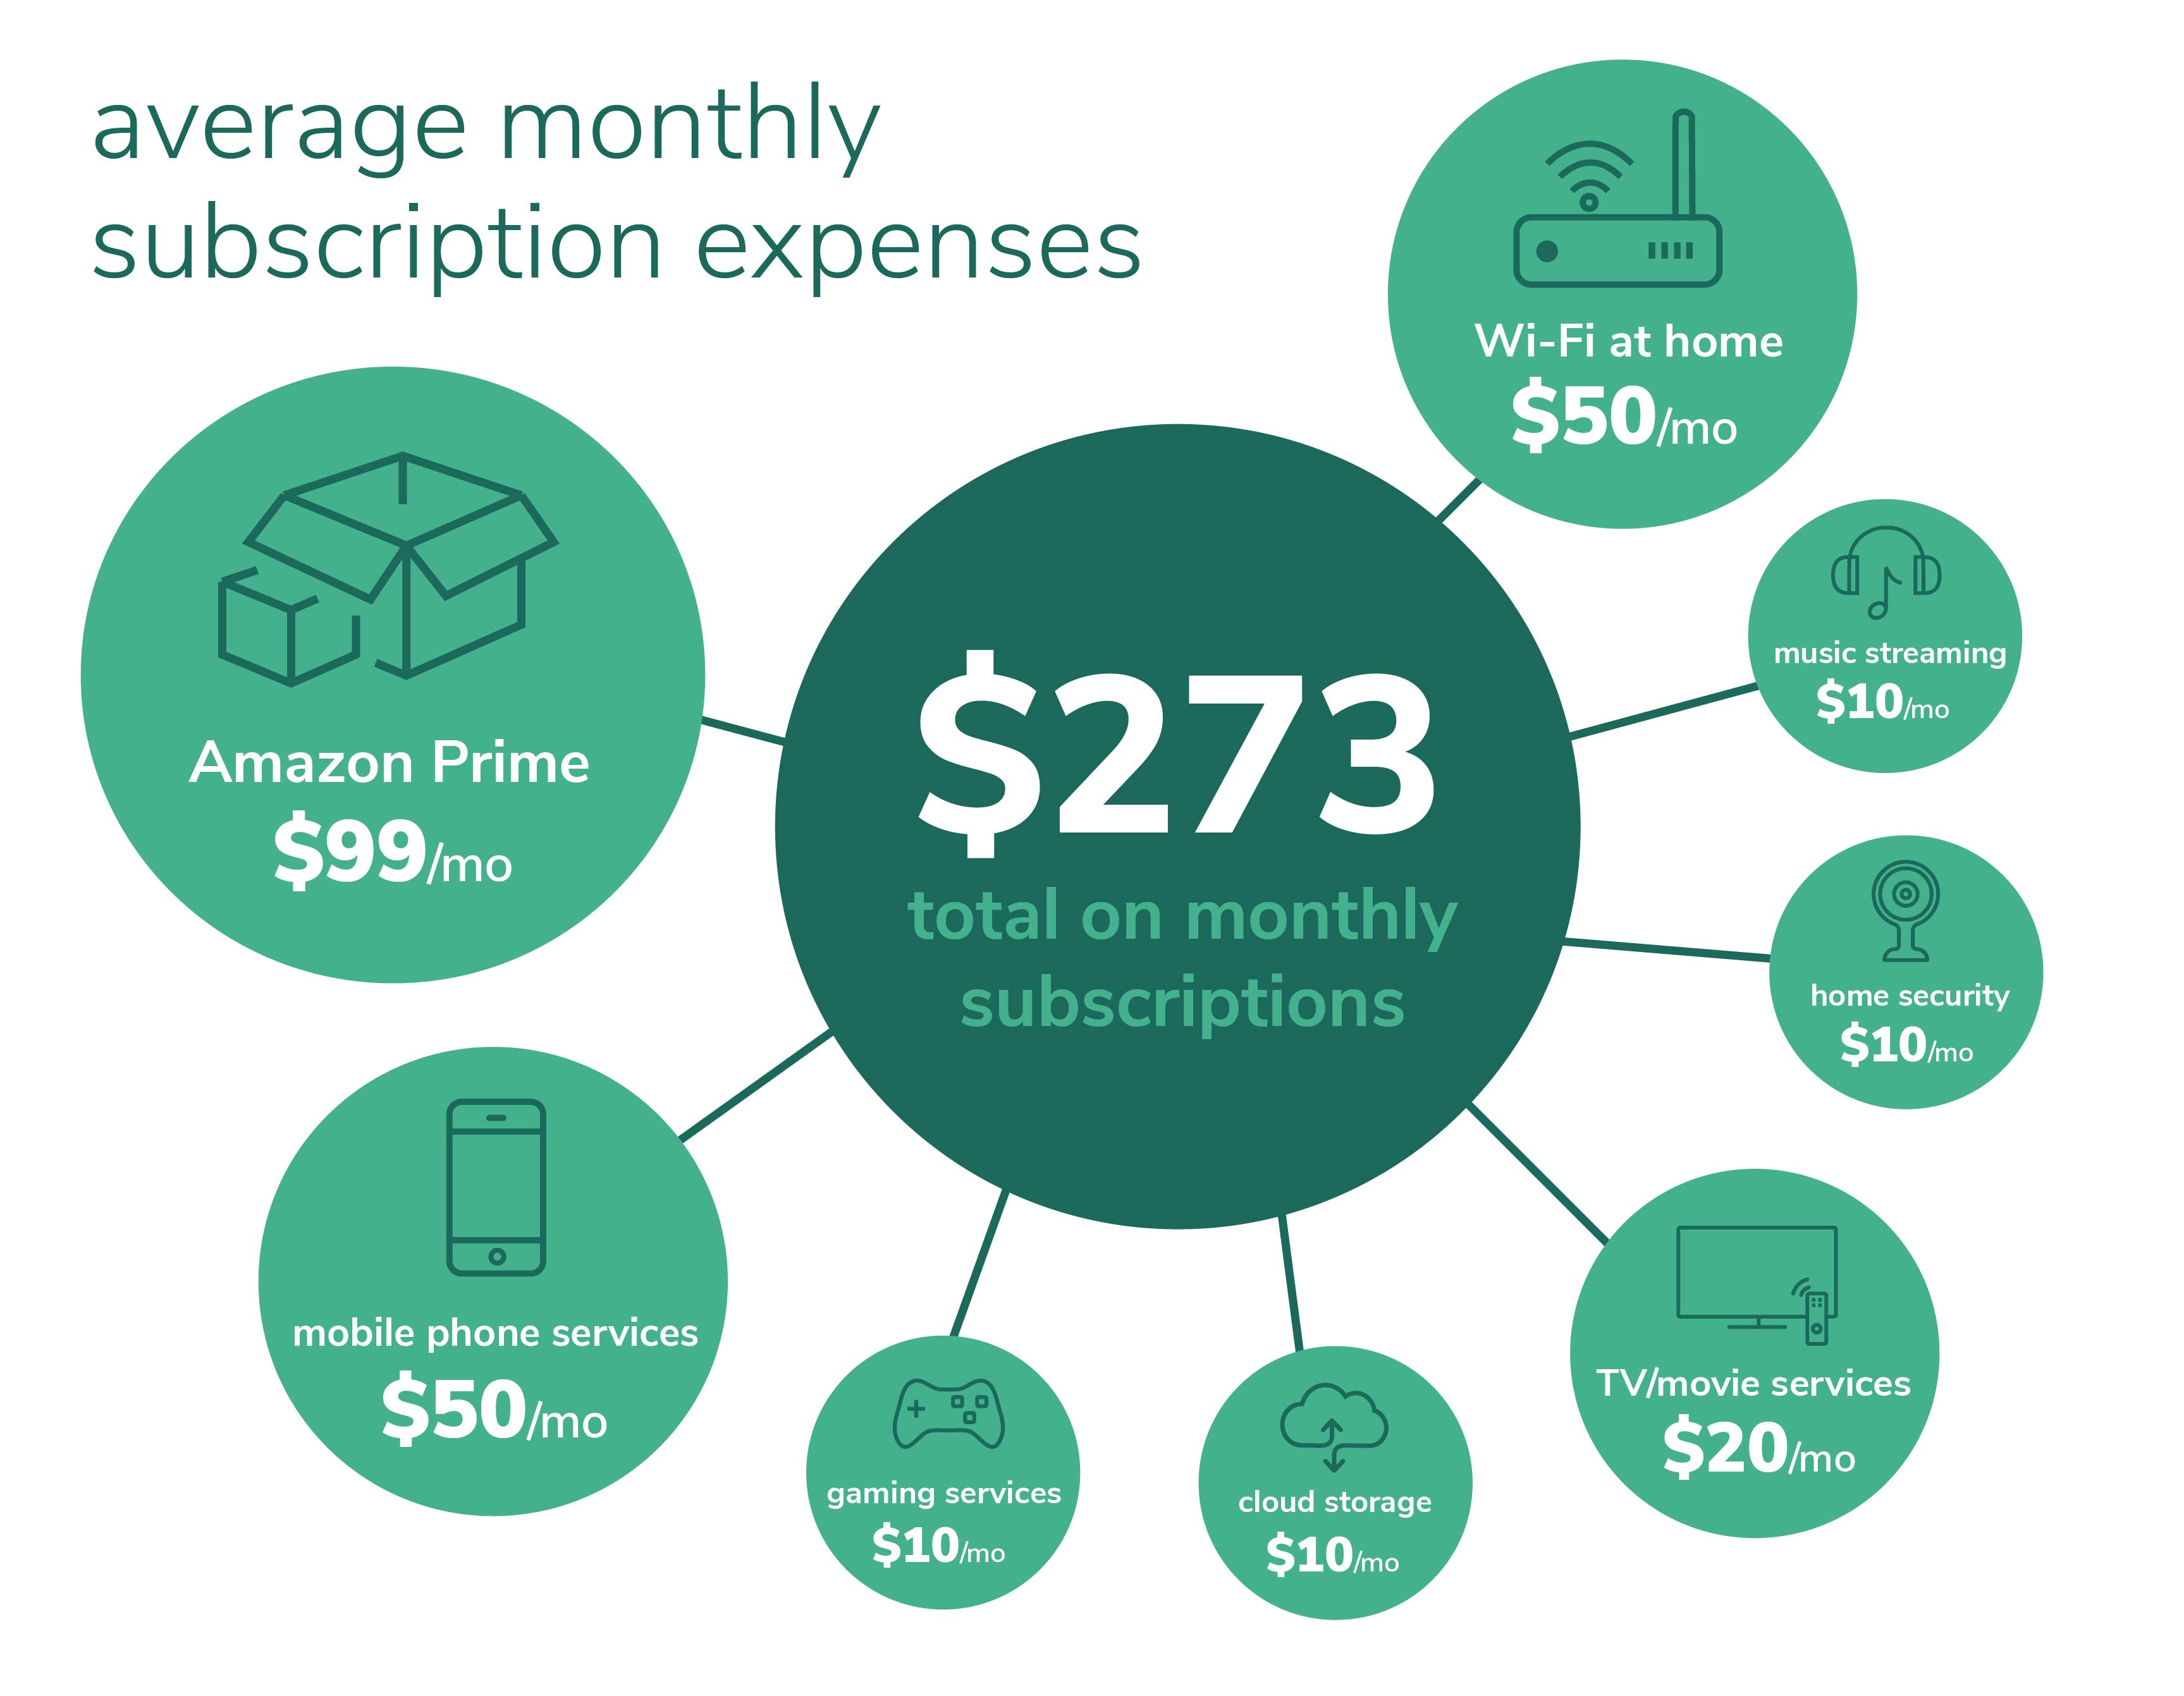 Average monthly subscription expenses